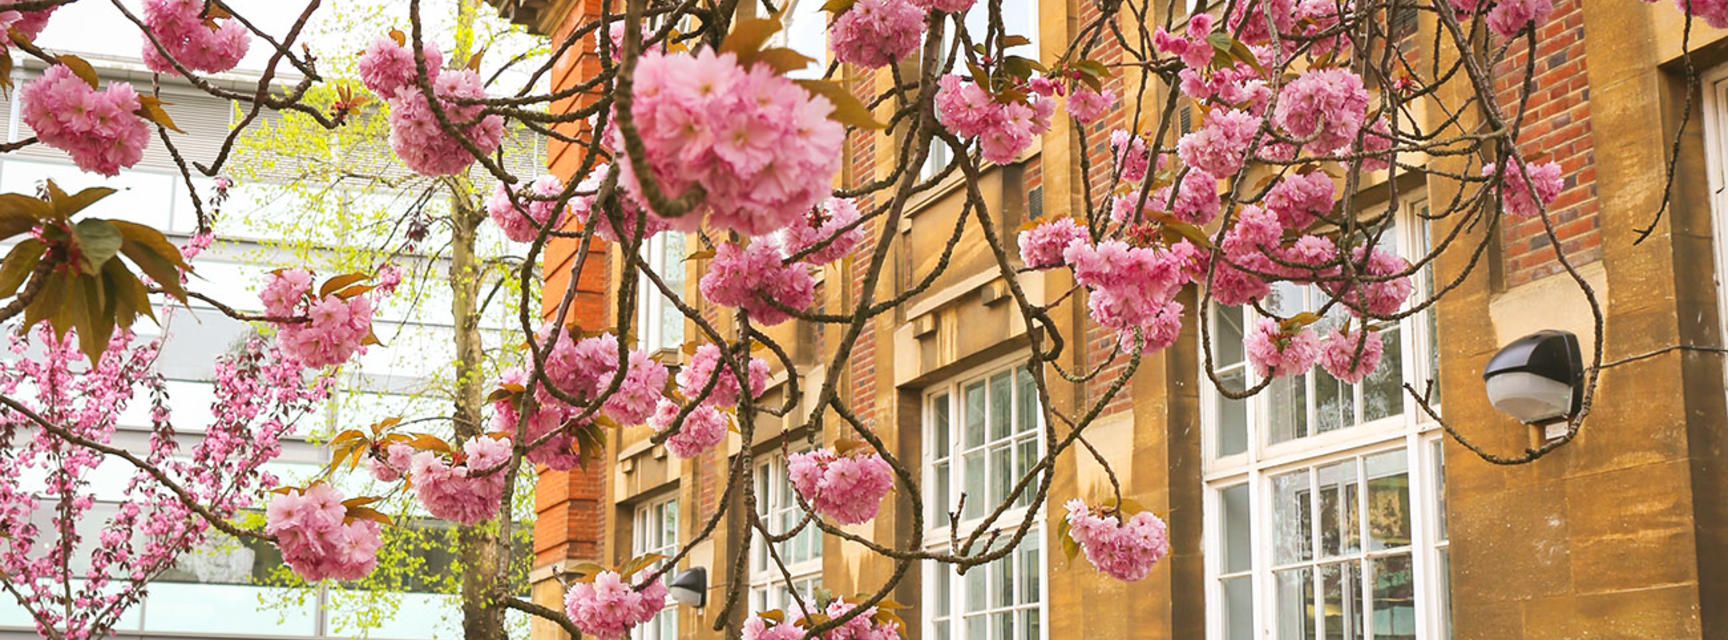 Photo of may blossom outside the Dyson Perrins Building